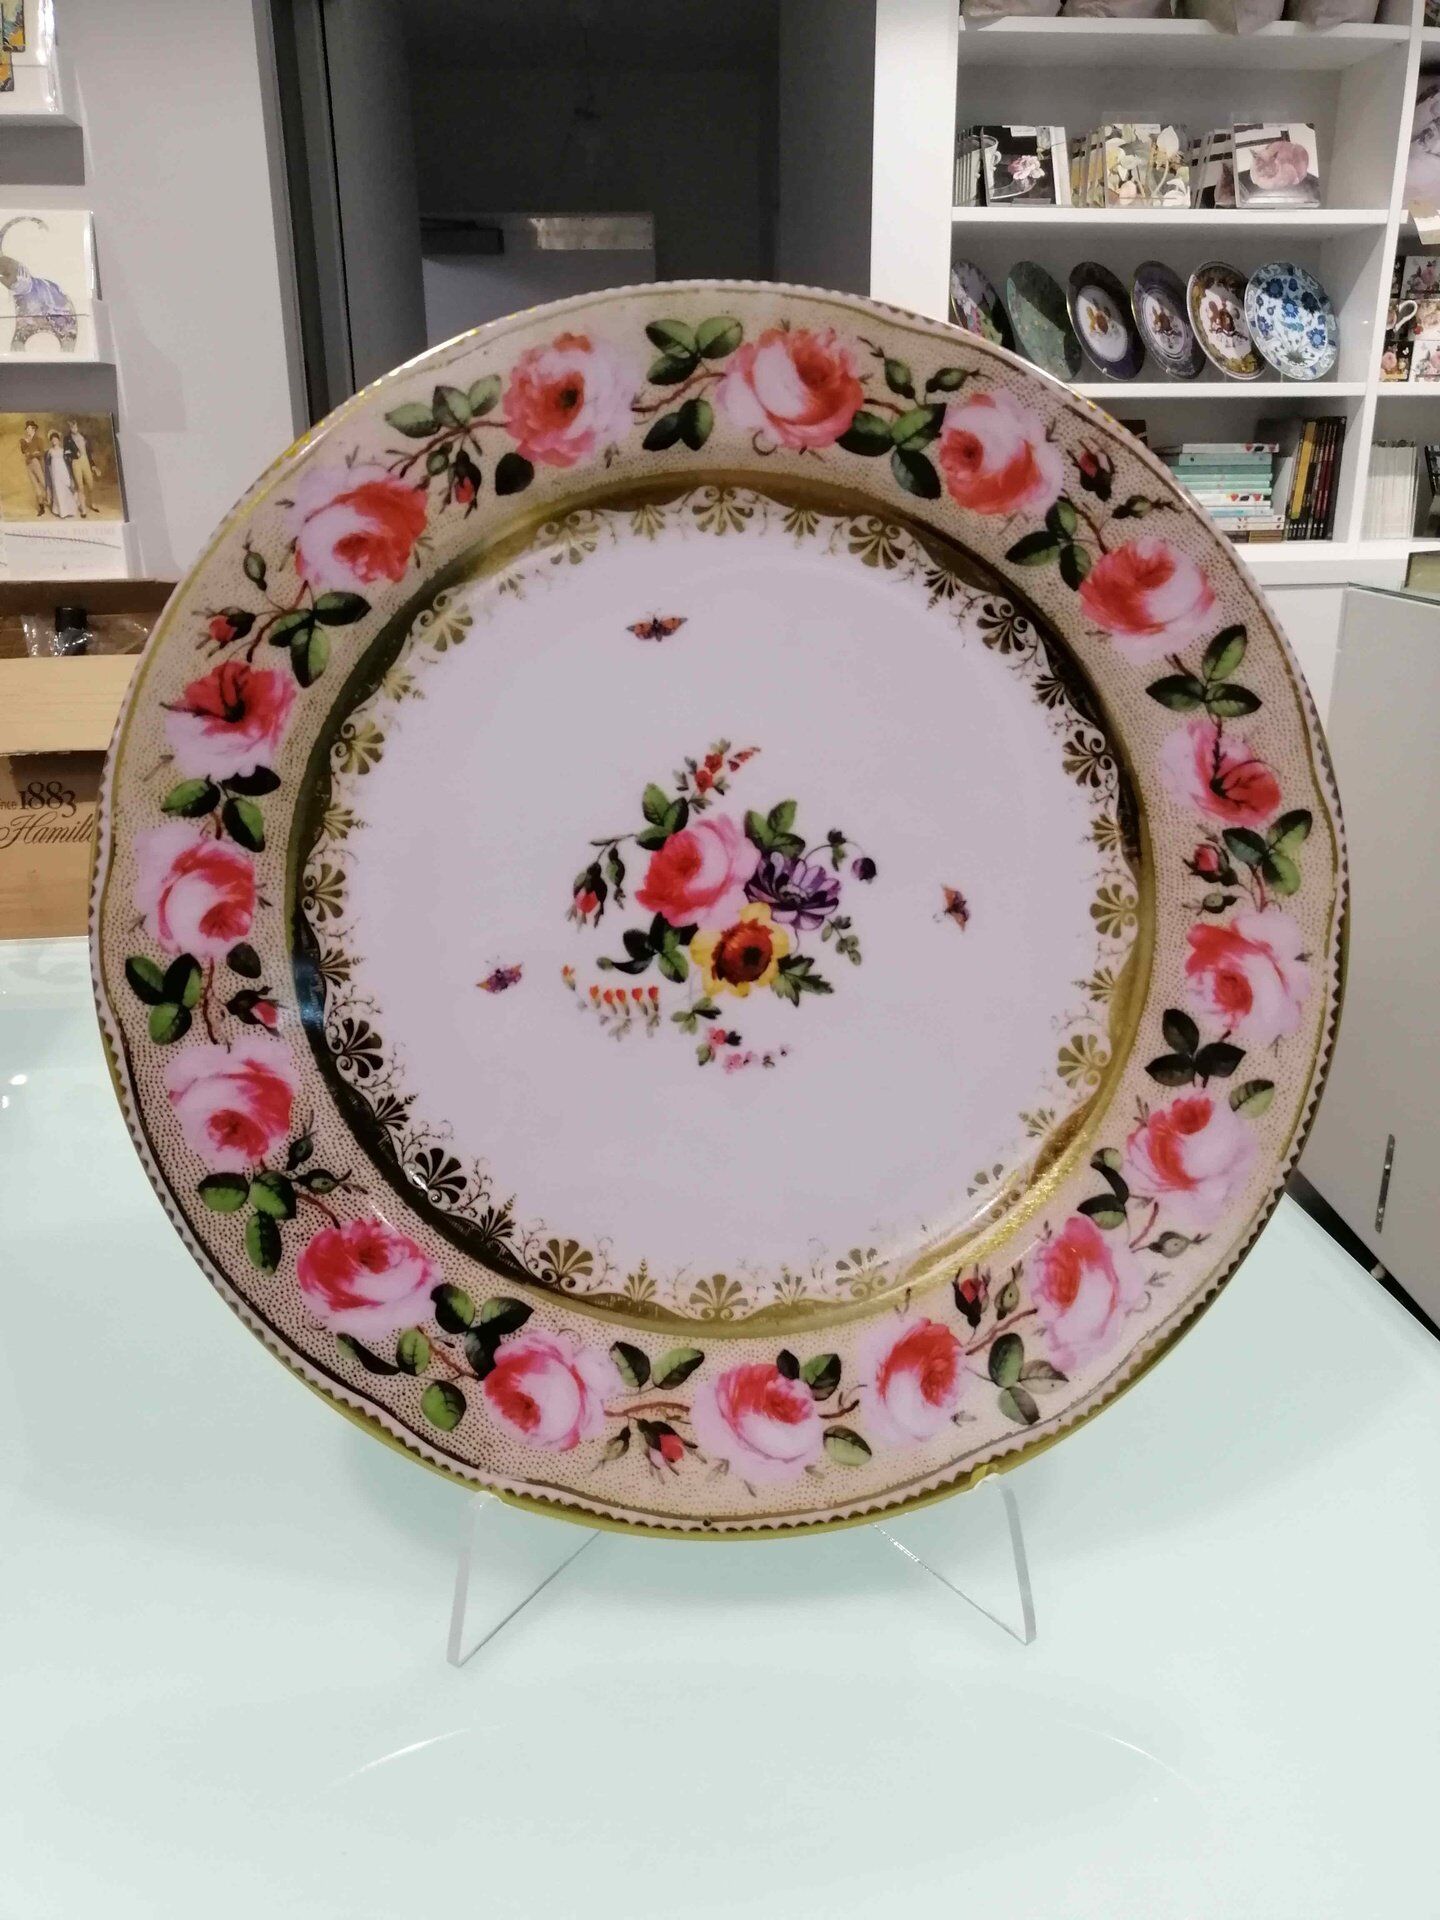 Tin Plate: V & A - Pink Roses